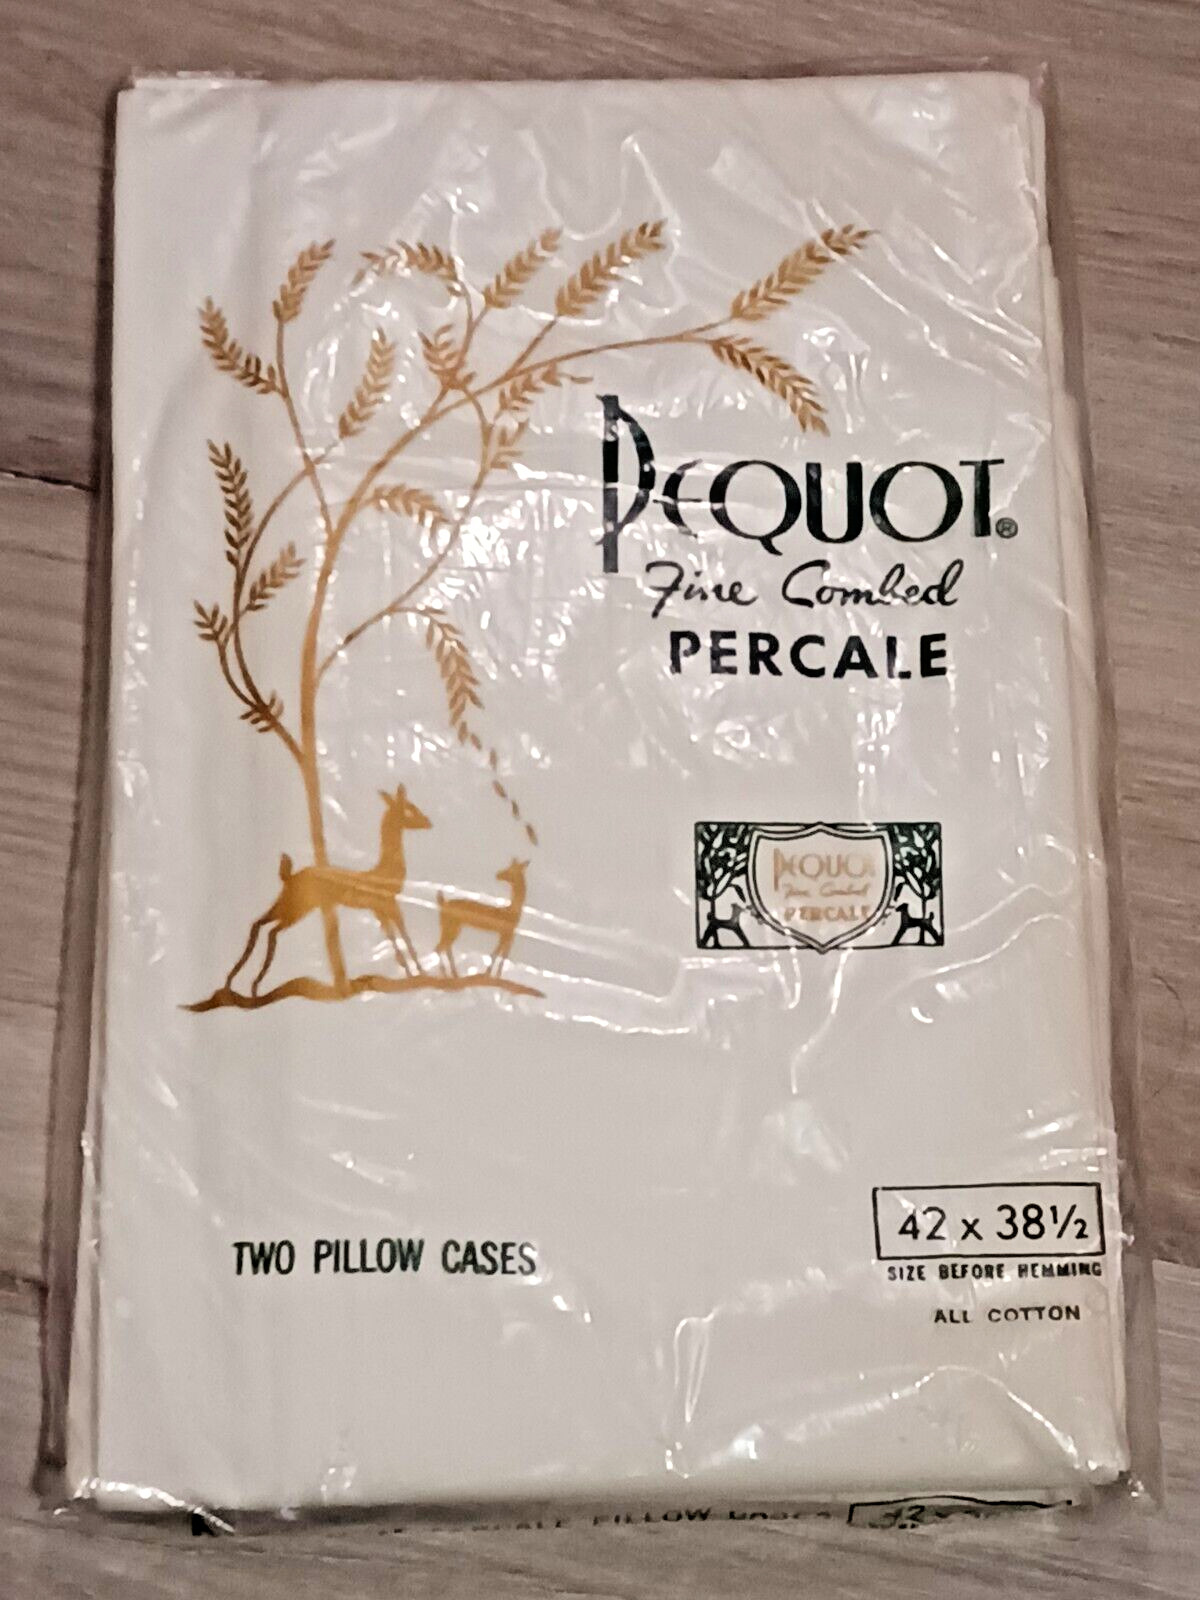 Vtg Pequot Percale White Pillow Cases 2pc Standard New Old Stock 100% Cotton MCM